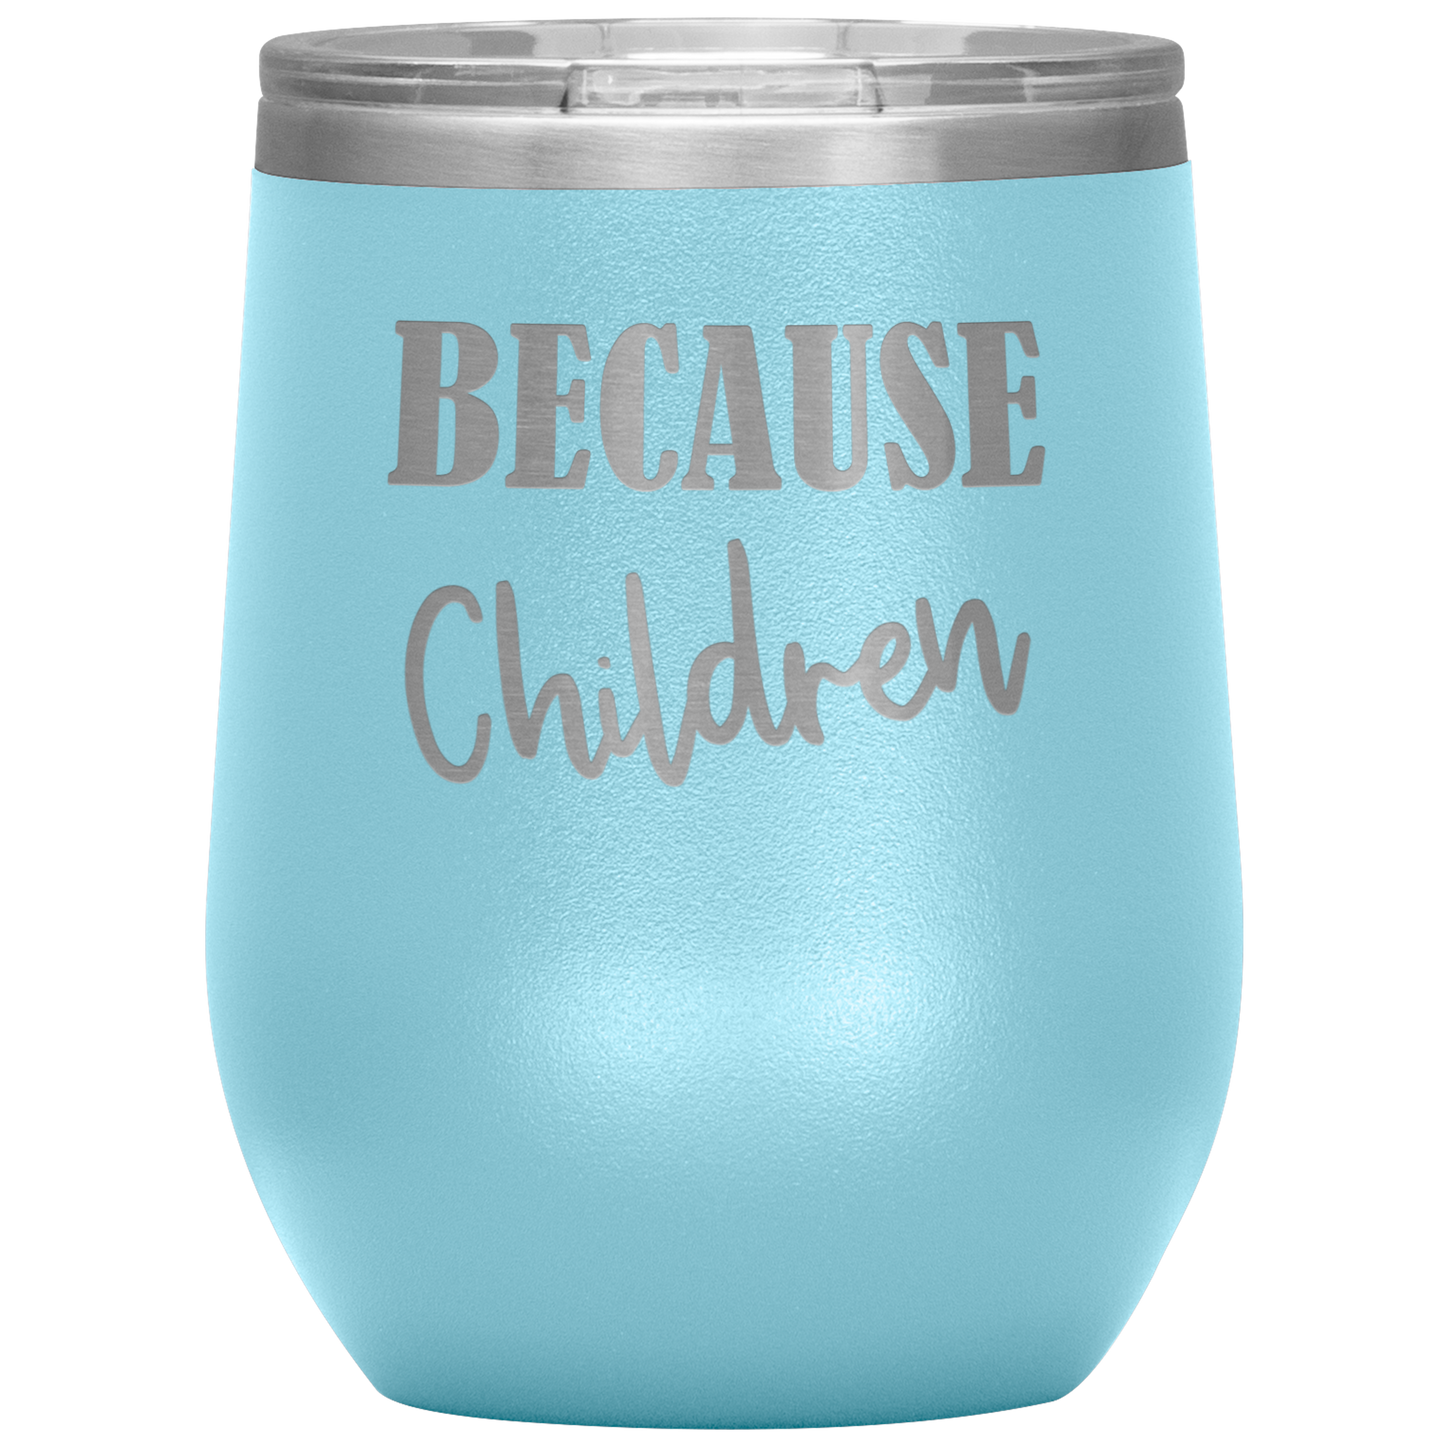 Custom "Because Children" 12 oz. Insulated Stainless Steel Wine Tumbler with Lid